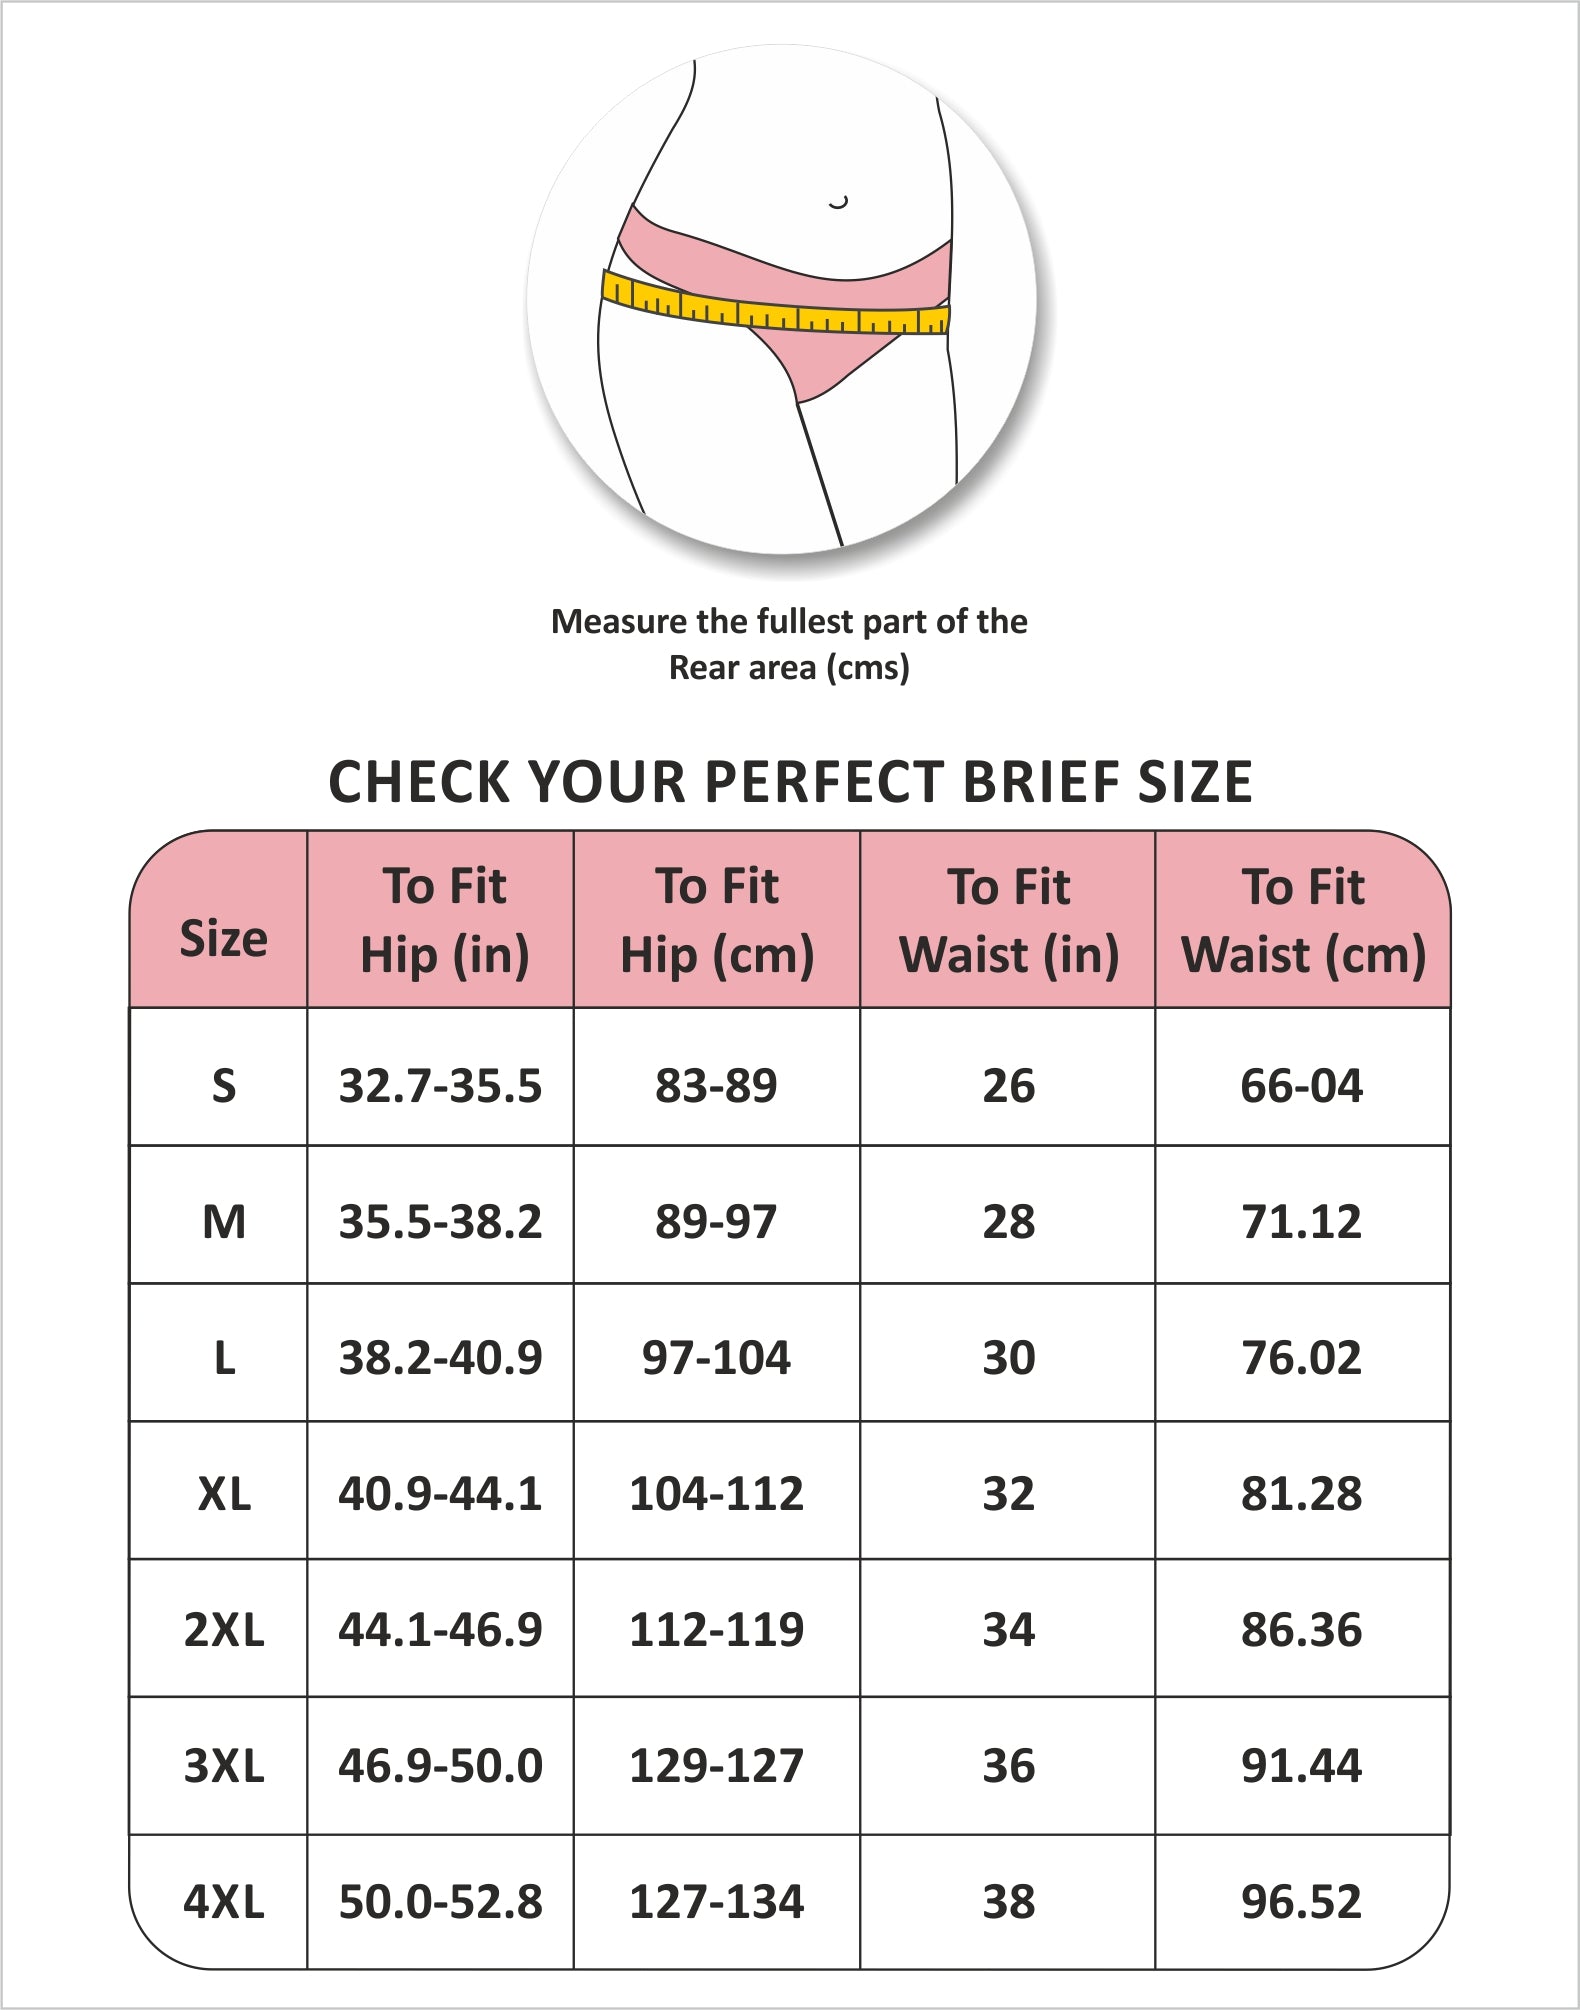 Mid Rise Medium Coverage Solid Colour Cotton Stretch Brief Panty (Pack of 3)